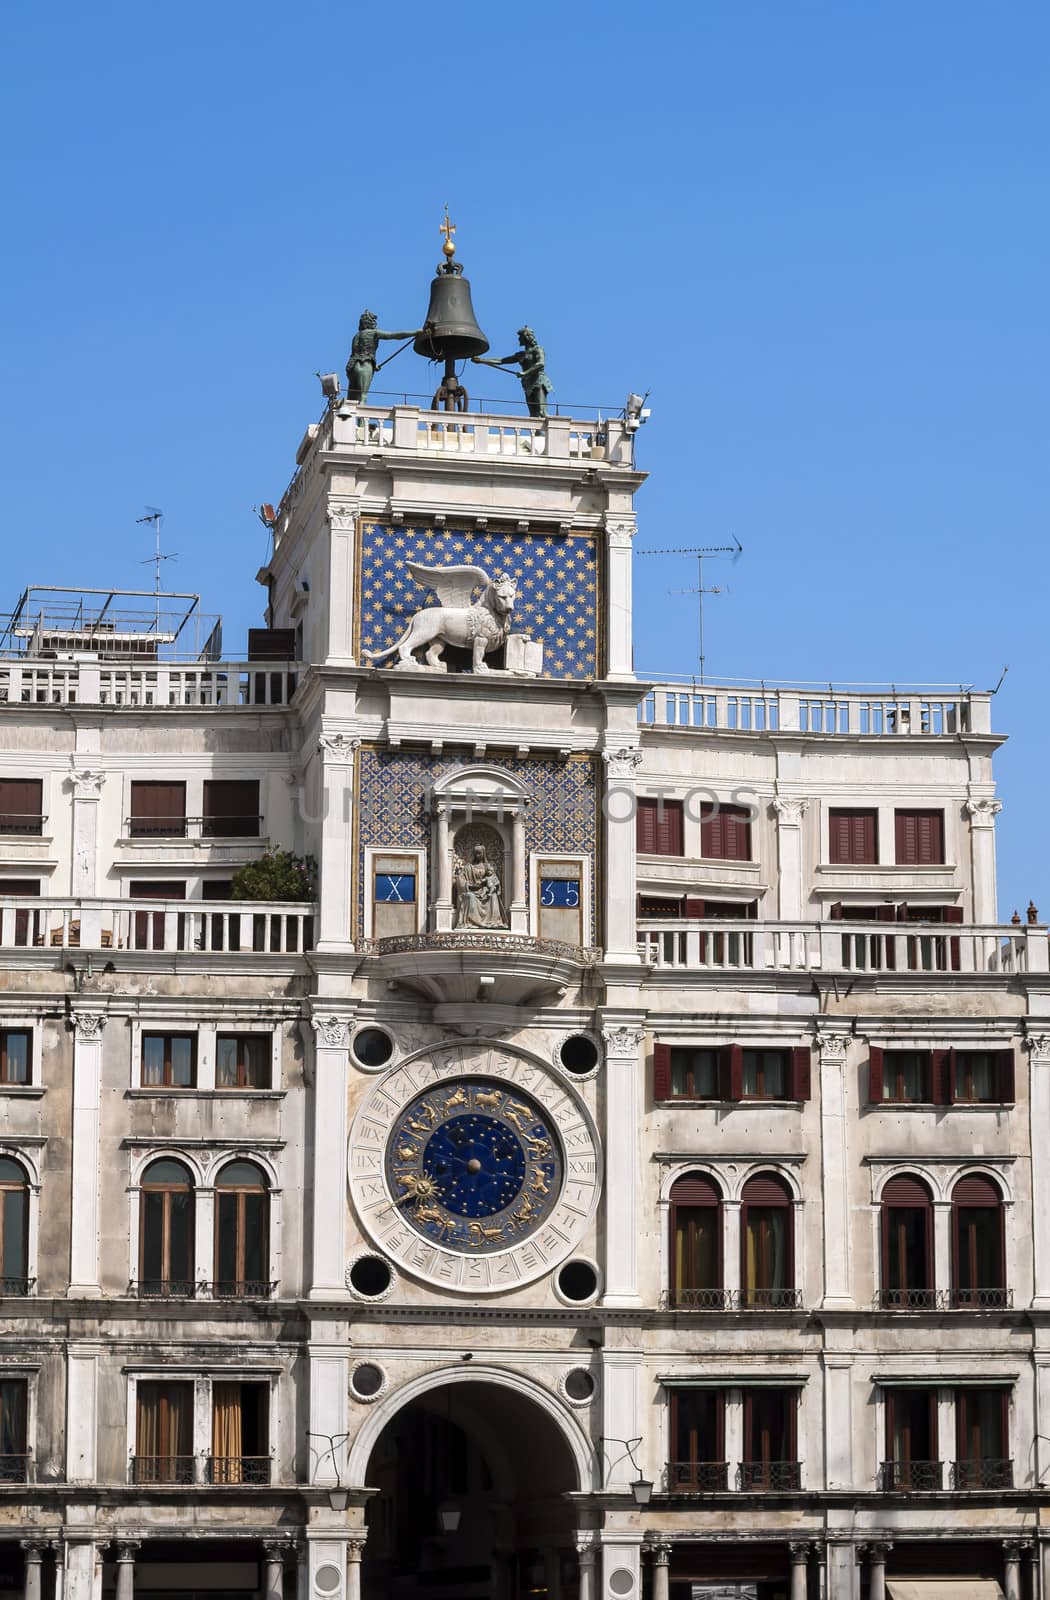 Astronomical clock in San Marco Square, Venice, Italy.